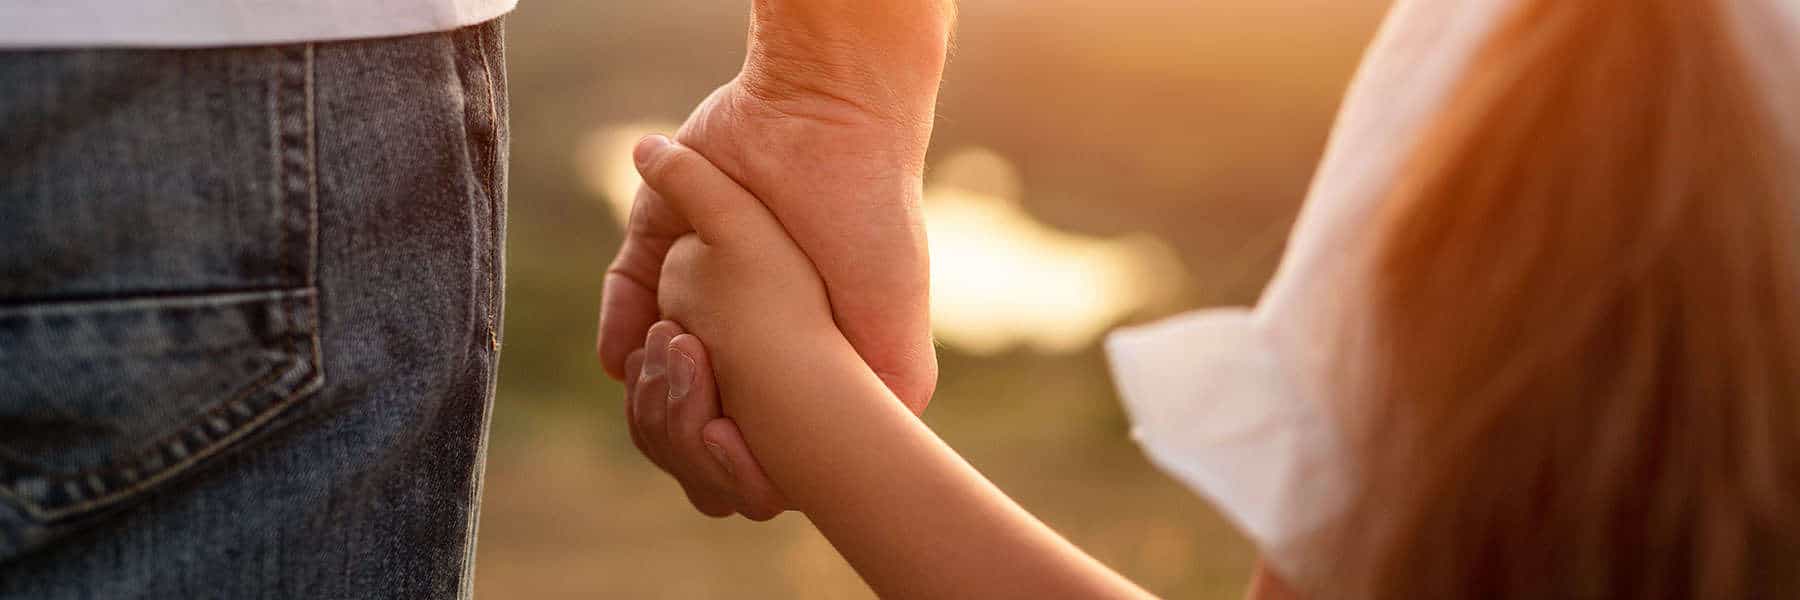 When can an absent parent see their child? | Family Law